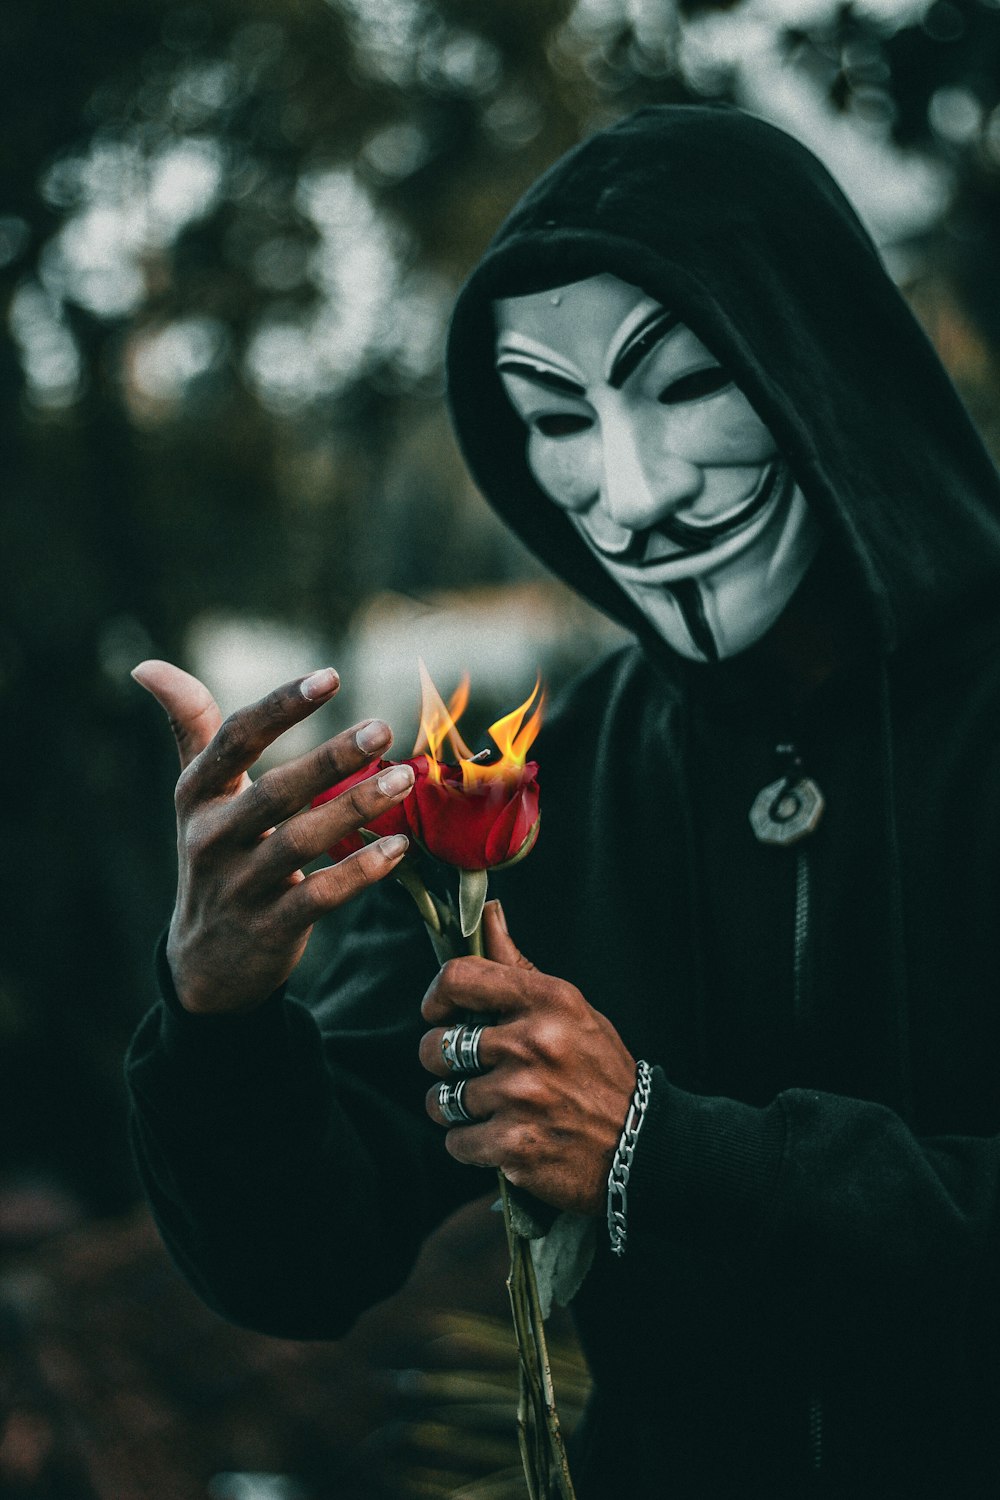 person wearing guy fawkes mask standing while holding burning red rose flower